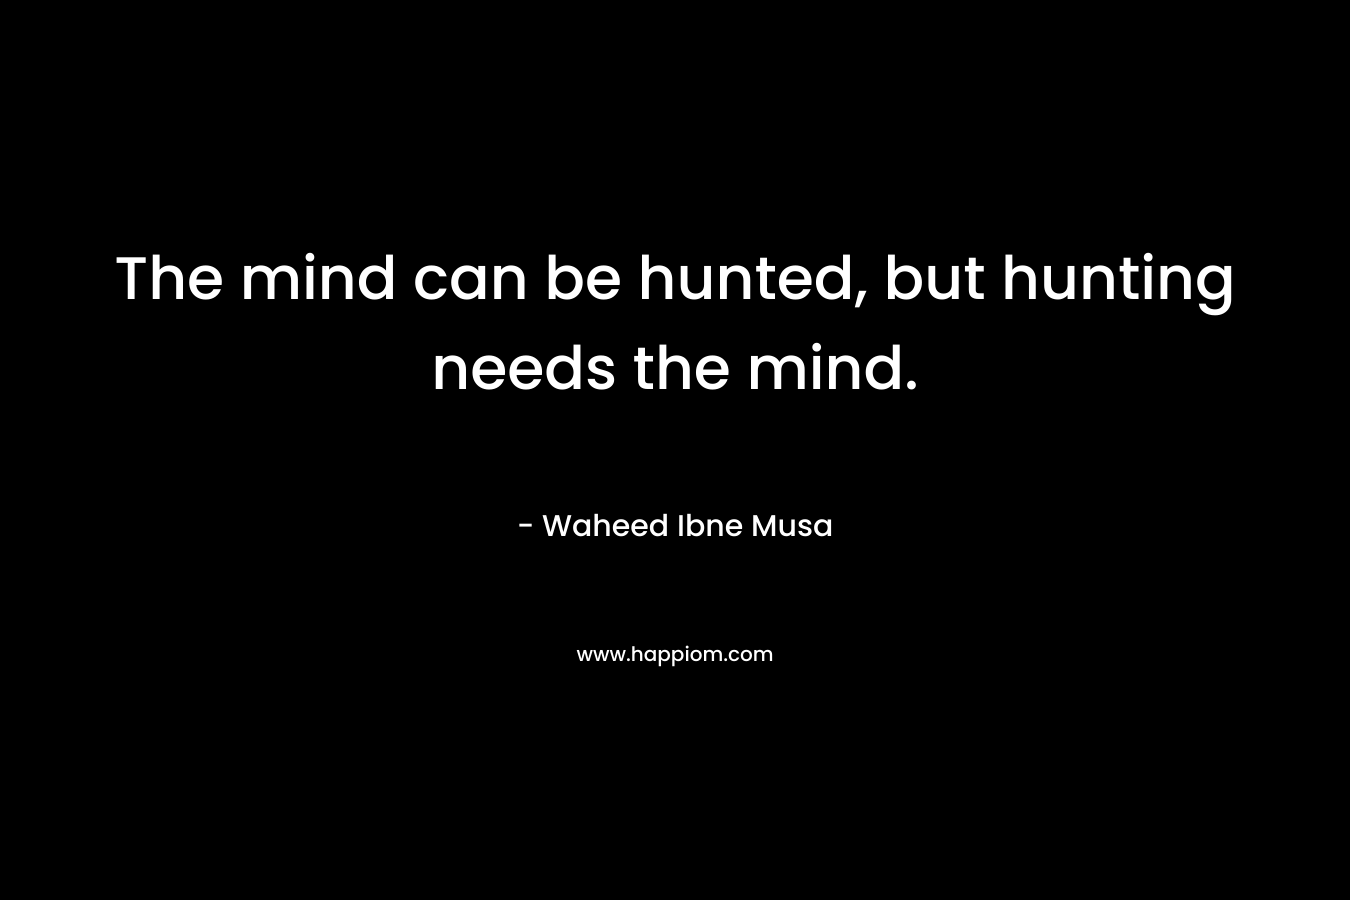 The mind can be hunted, but hunting needs the mind.